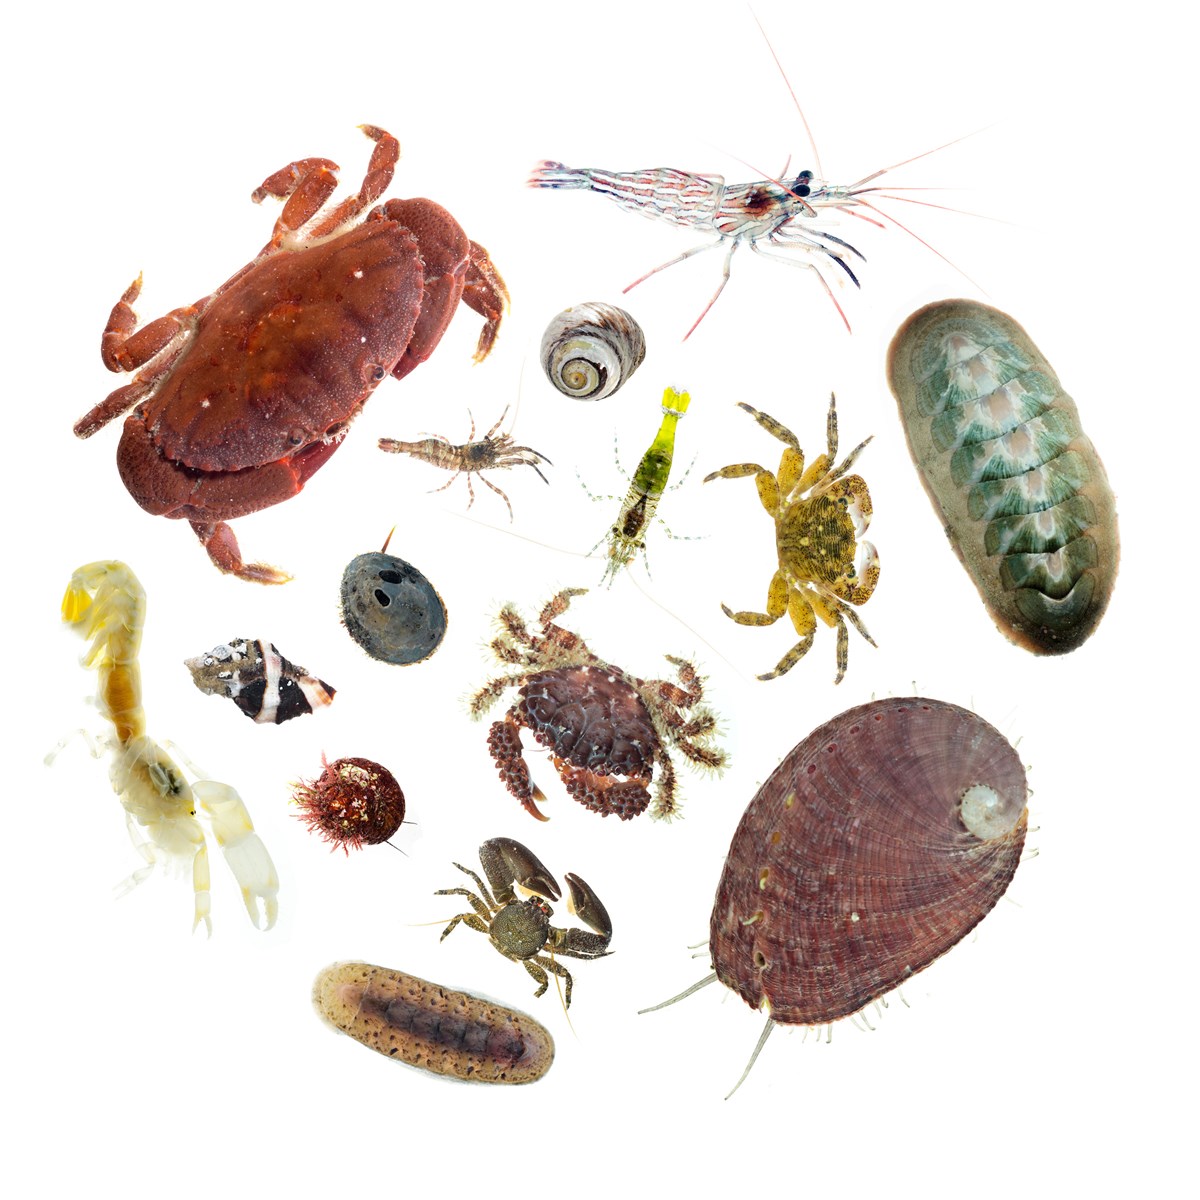 Collage of crabs, shrimp, snails, and chitons, each photographed against a white background. Each creature's form, color, and individuality shine through.